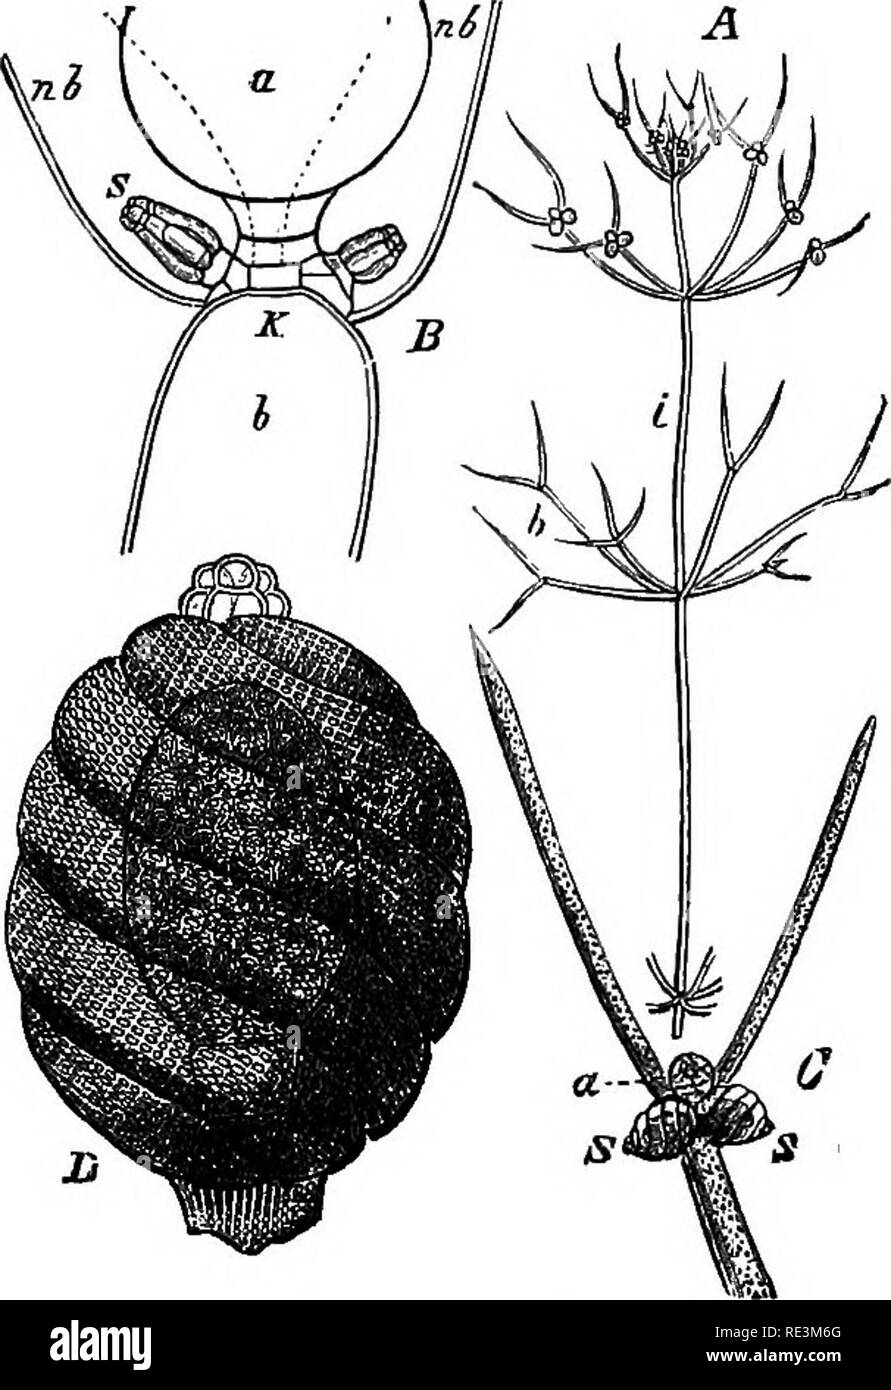 . A handbook of cryptogamic botany. Cryptogams. CHARACE.'E S79 The Characese are either monoecious 9r dicEcious, In the former case the male and female organs are formed in close juxtaposition on the same node, the archegone being somewhat below the antherid in Nitella, above it or by its side in Chara. The archegones, like the antherids, are metamorphosed leaves. When ready for fertilisation, the archegone has a, longer or shorter ovoid form, and is borne on a short pedicel-cell. In the interior is an axial row of cells enveloped by five tubes, which are at first straight, but are afterwards  Stock Photo